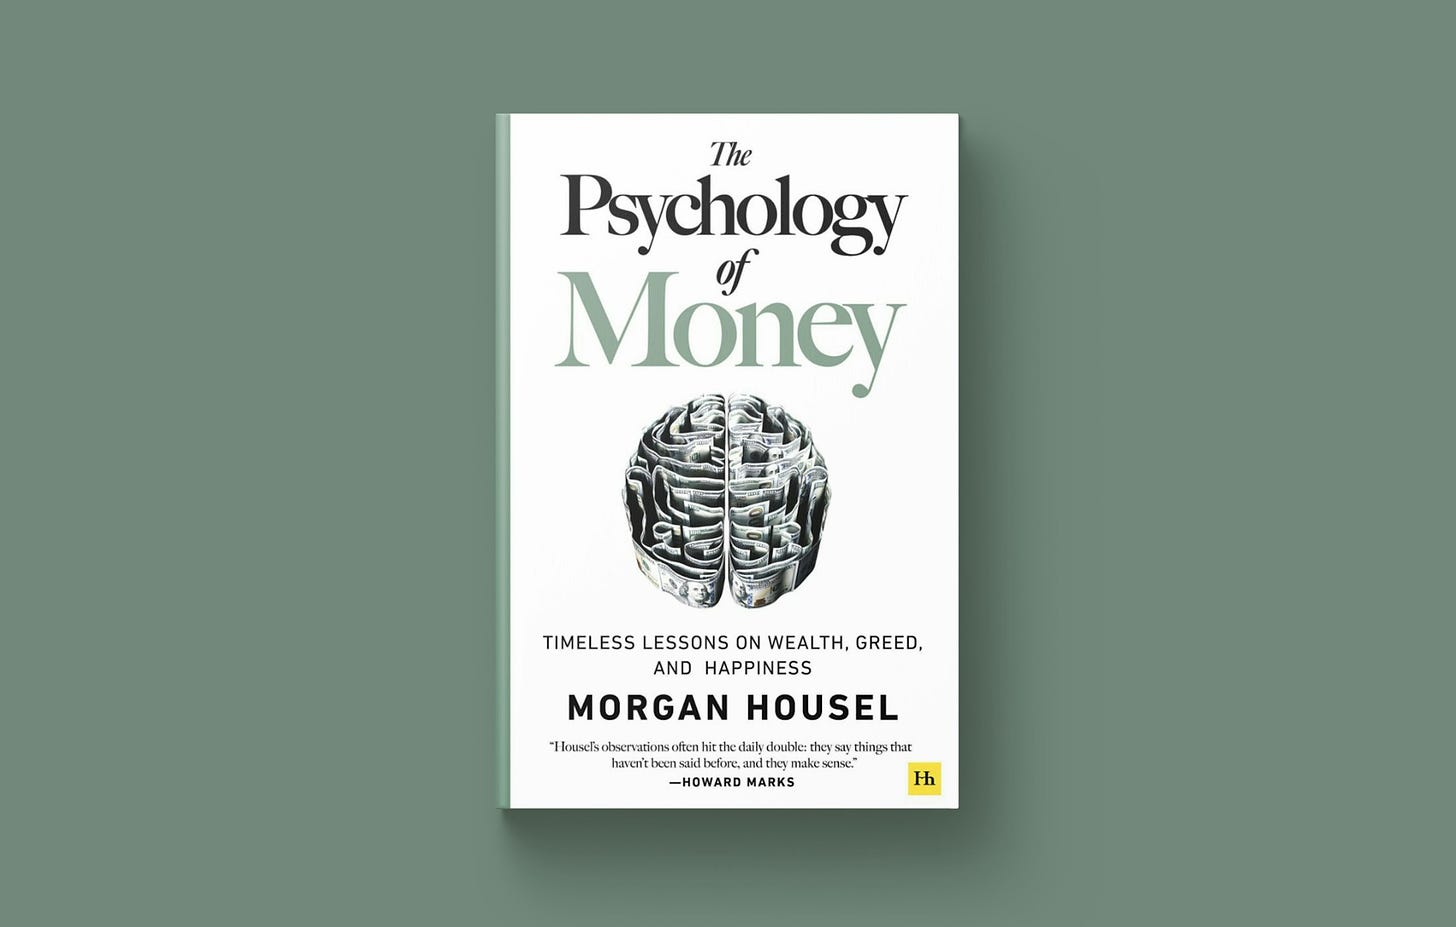 The psychology of money - My takeaways from a best seller